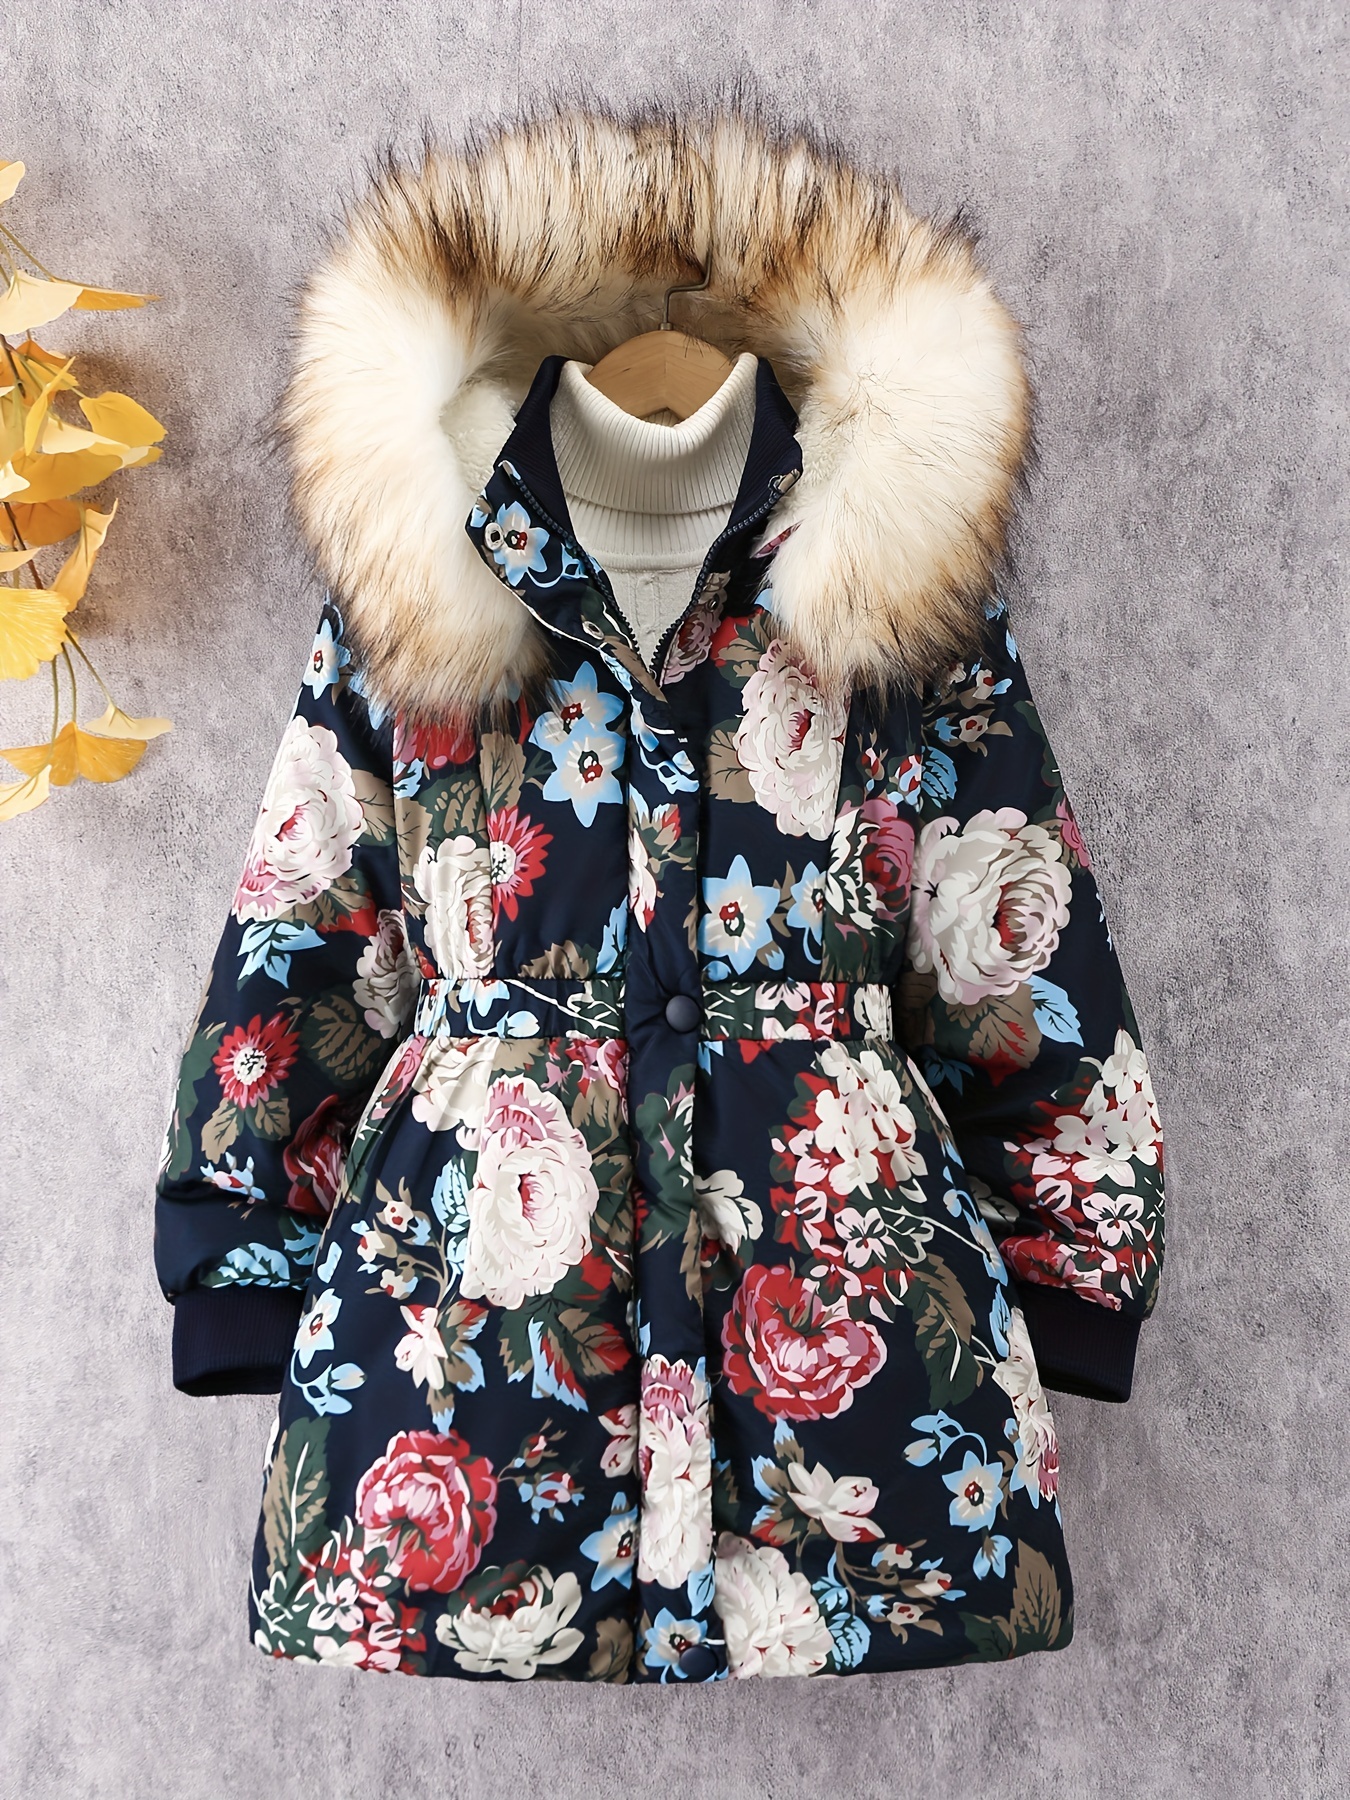 Girls Fleece Hooded Snow Suit Floral Graphic Winter Fall Clothes Warm  Jacket Kids Thick Windproof Hoodie Coat